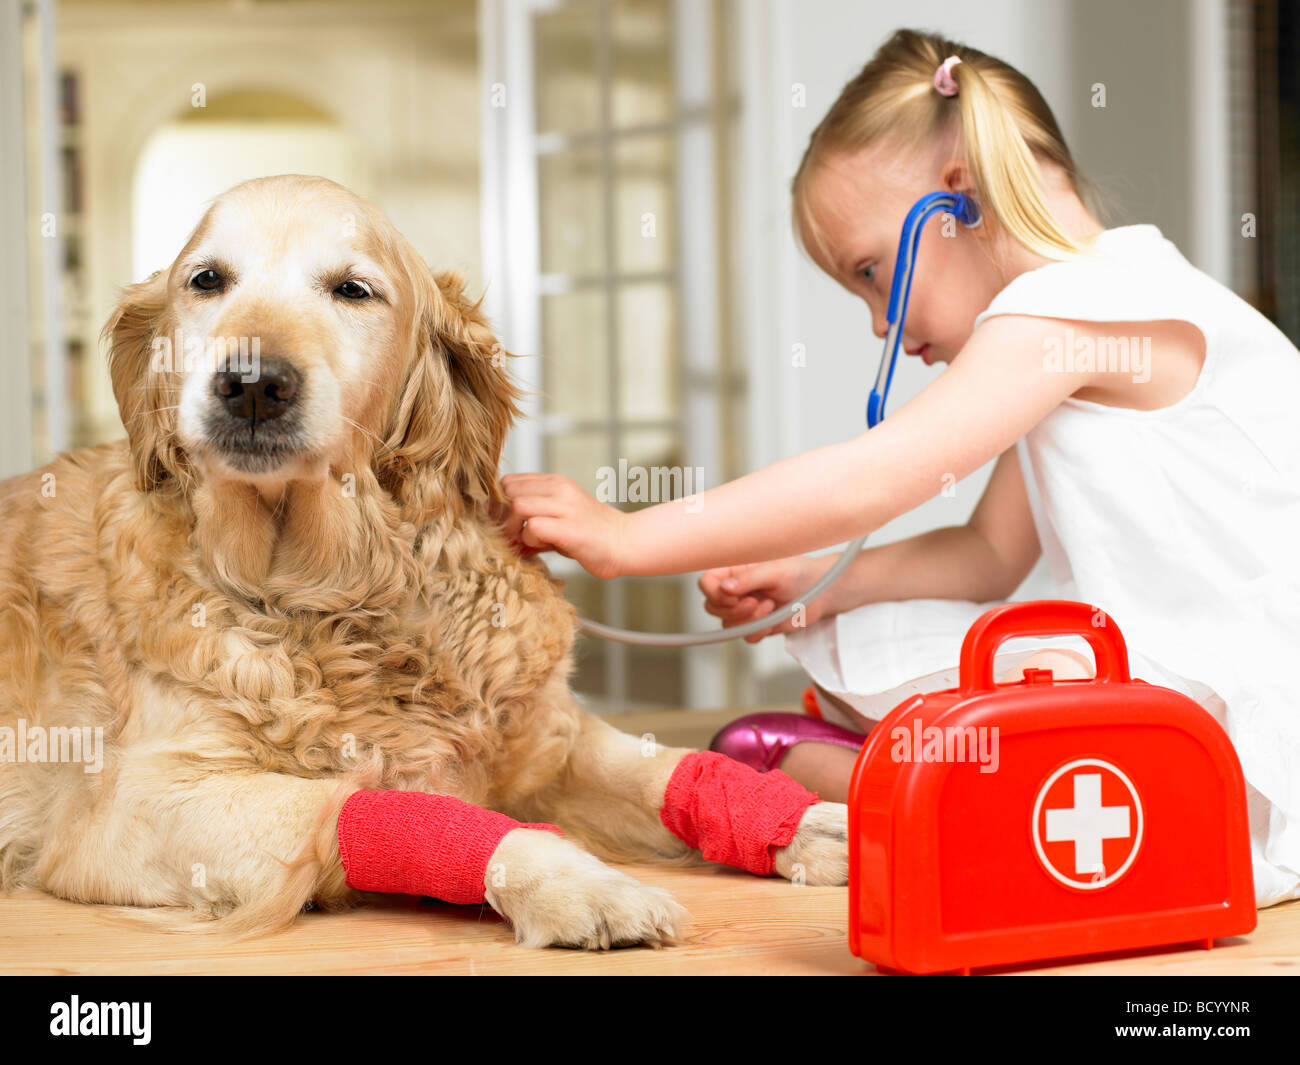 Girl playing doctor with dog Stock Photo